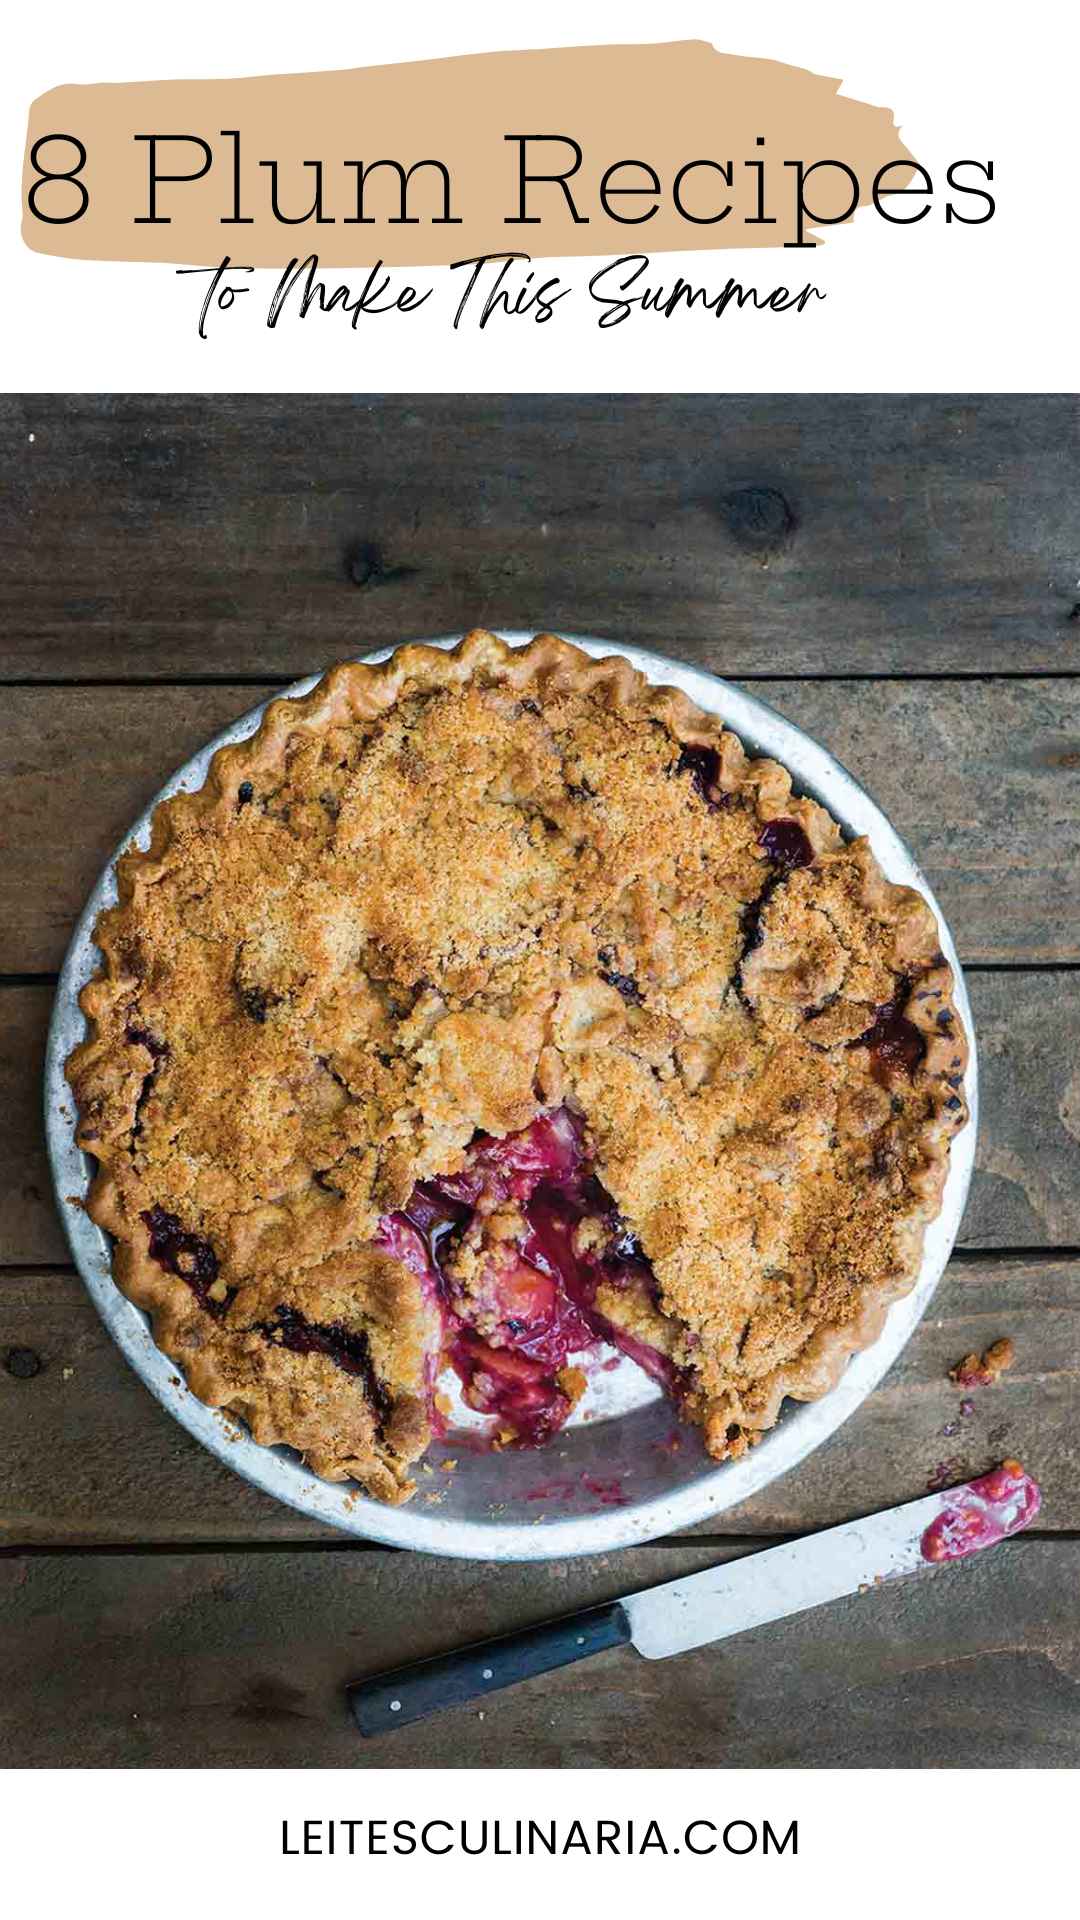 A plum crumble pie with a serving missing.